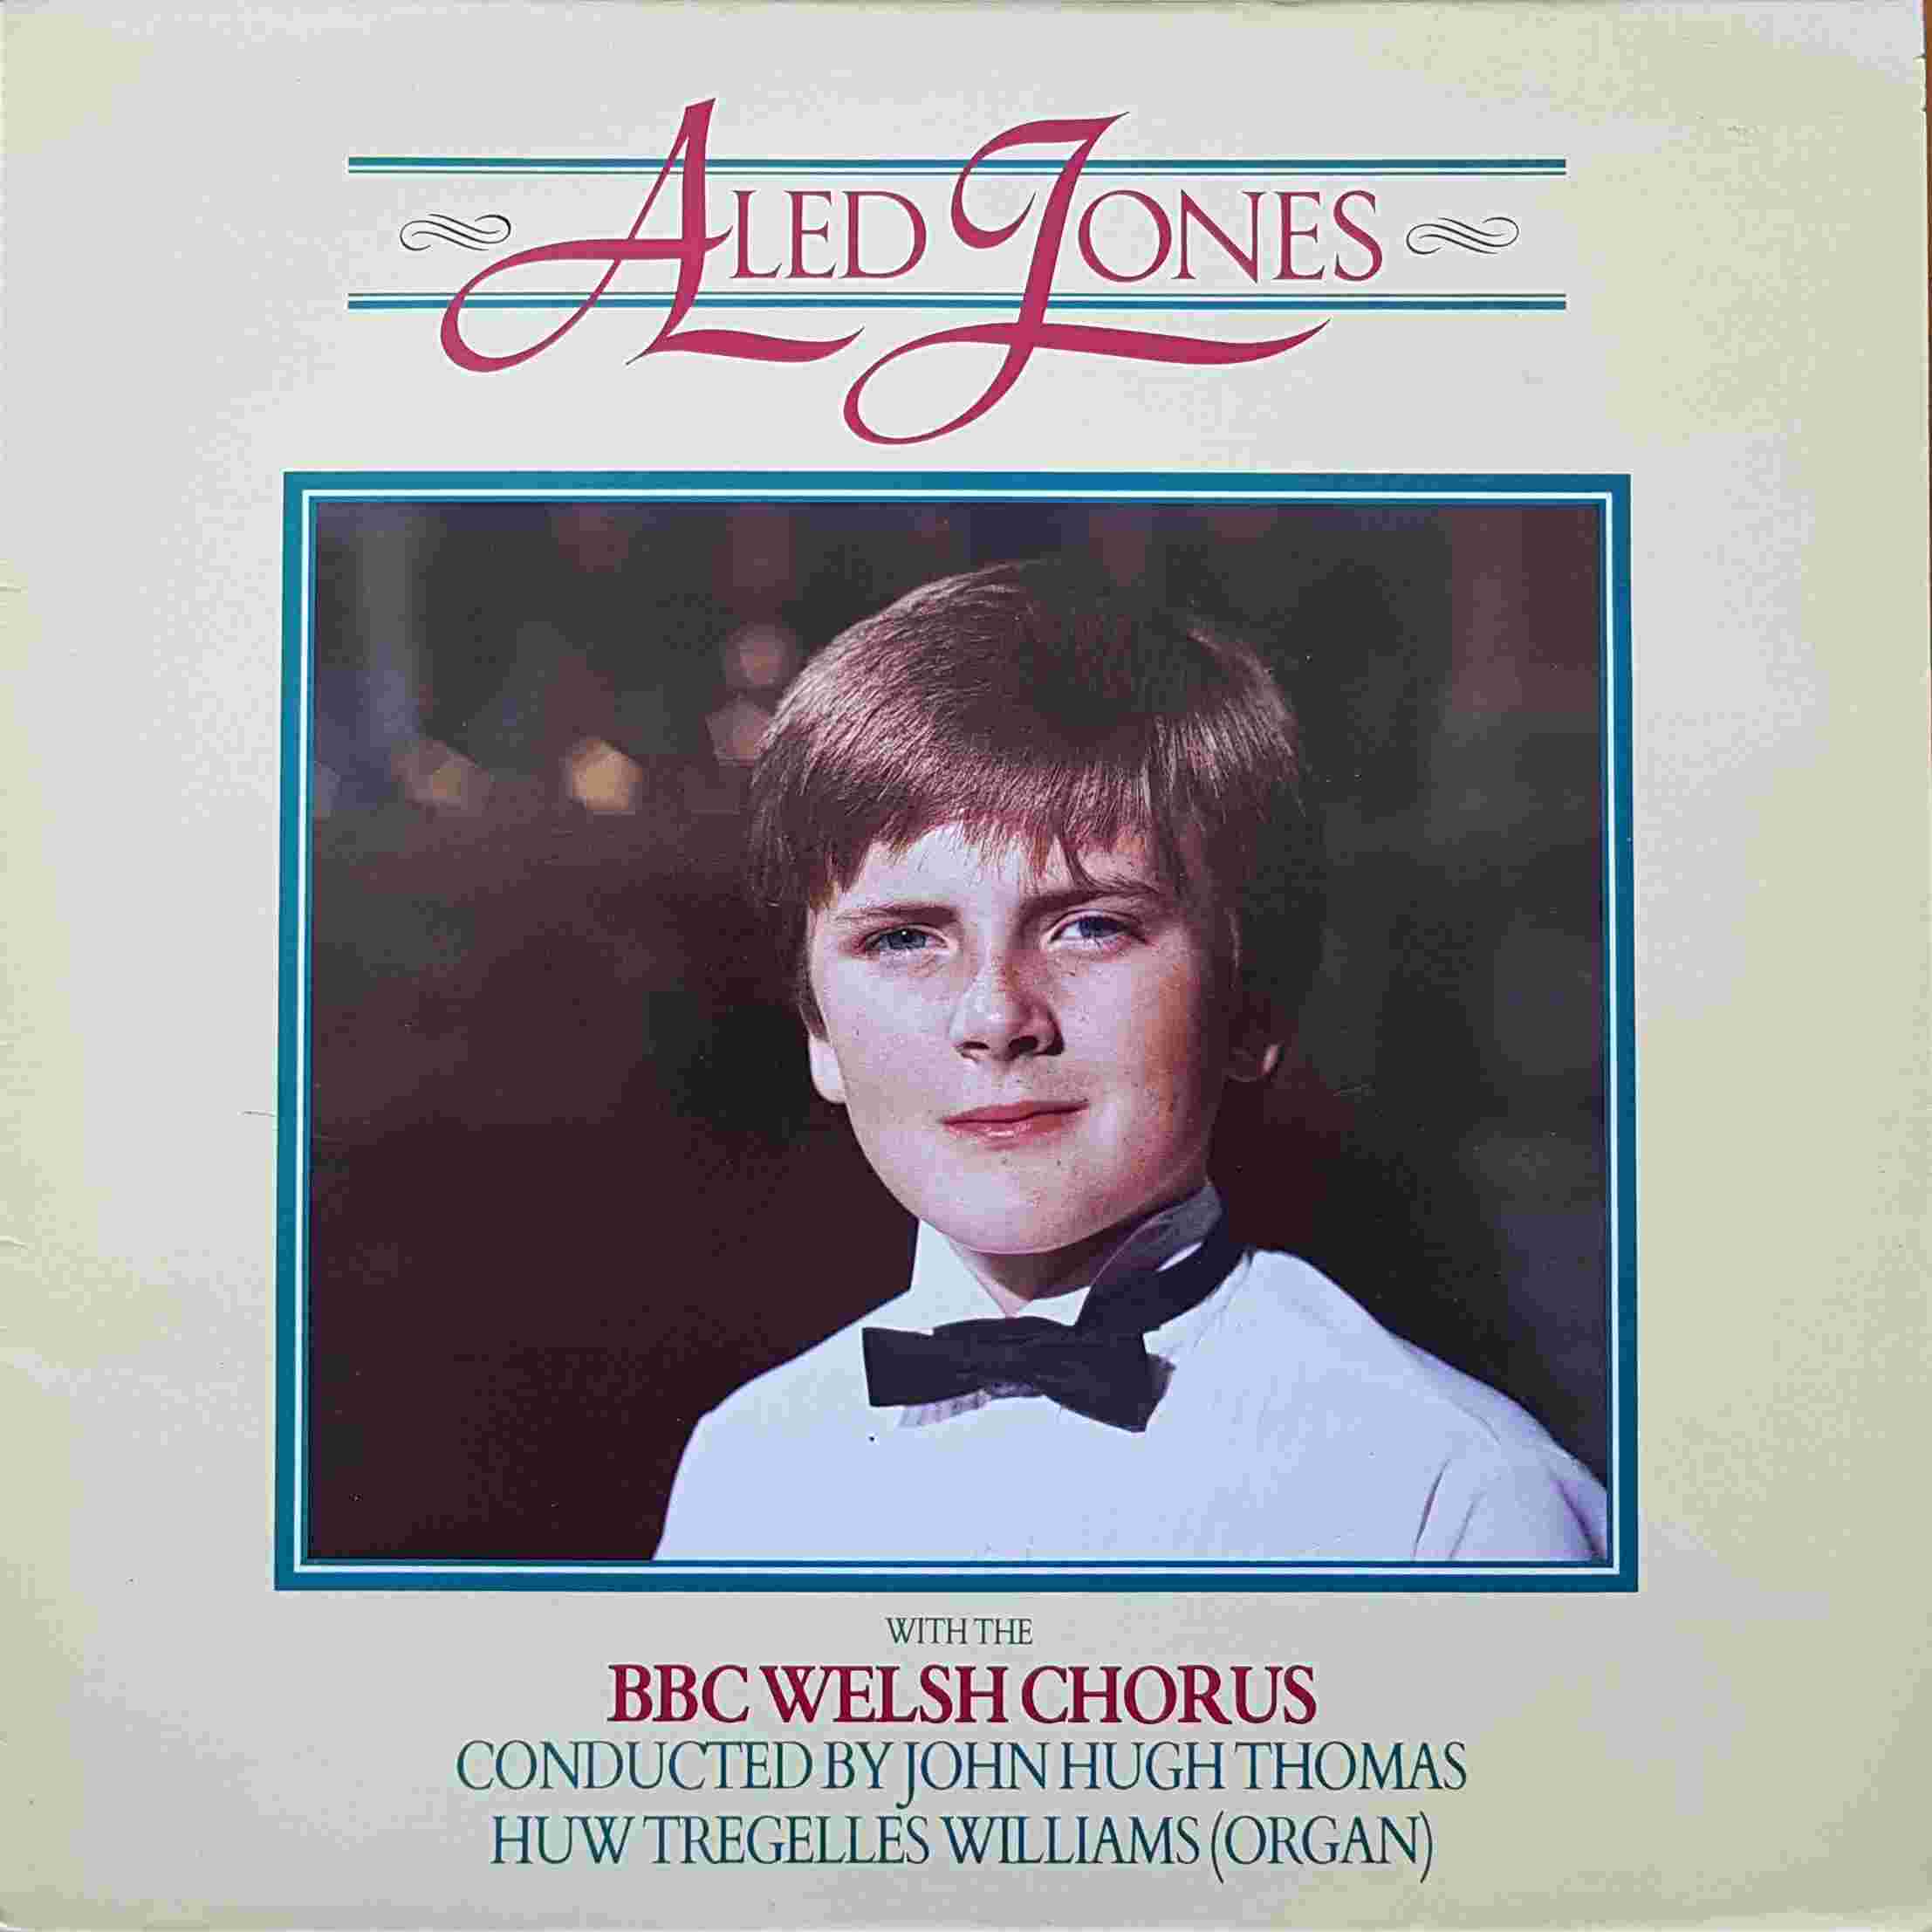 Picture of Aled Jones by artist Aled Jones from the BBC albums - Records and Tapes library